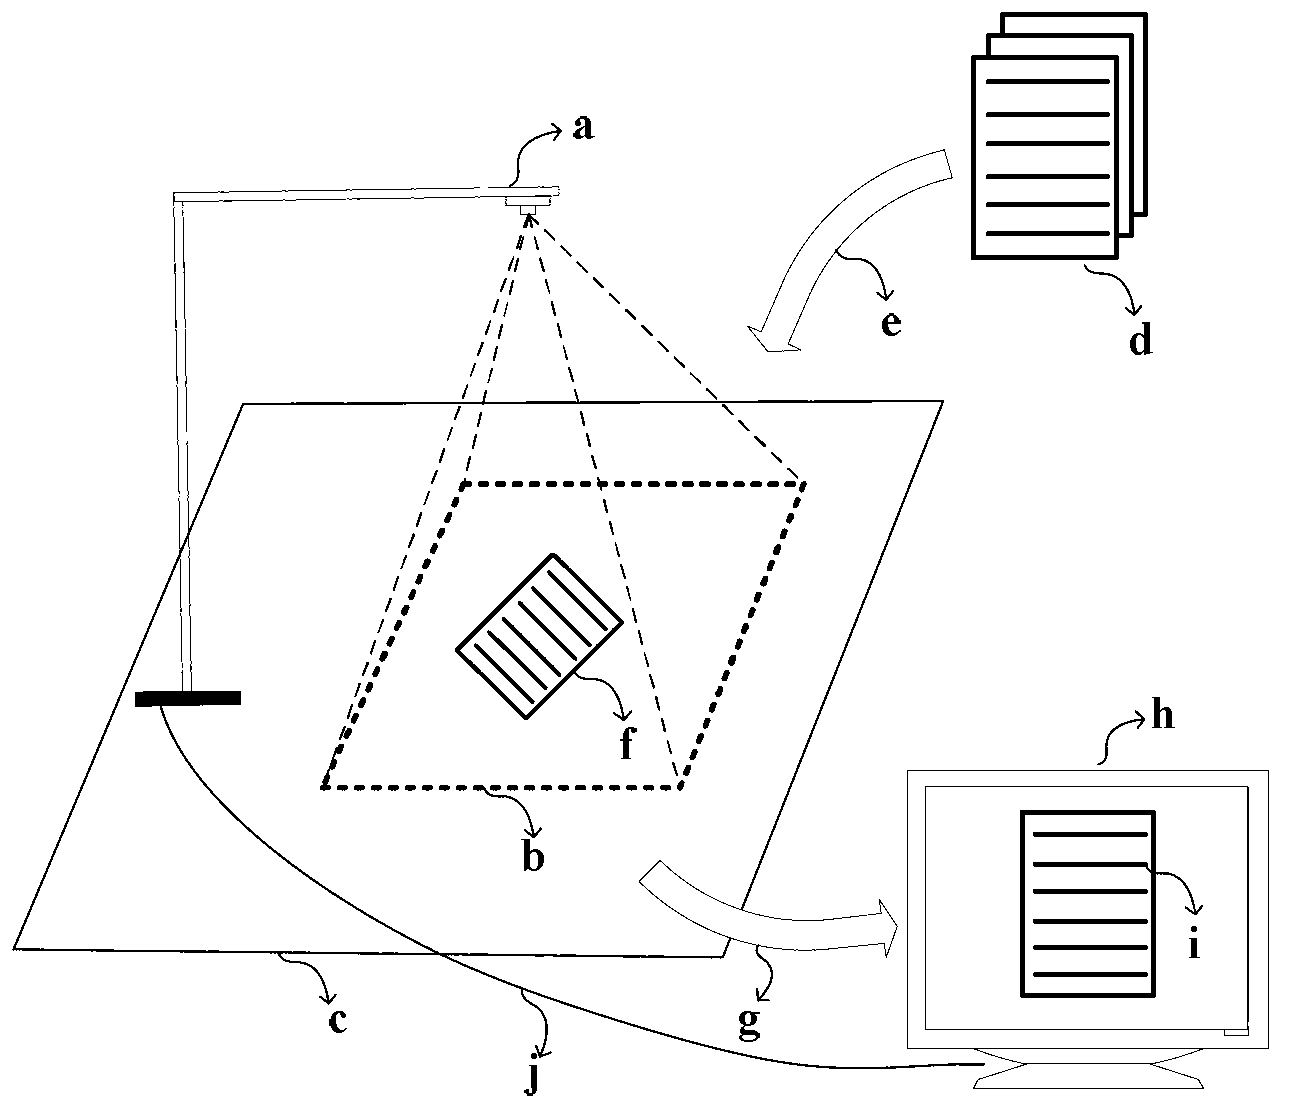 Portable intelligent document image collecting system and method based on computer vision